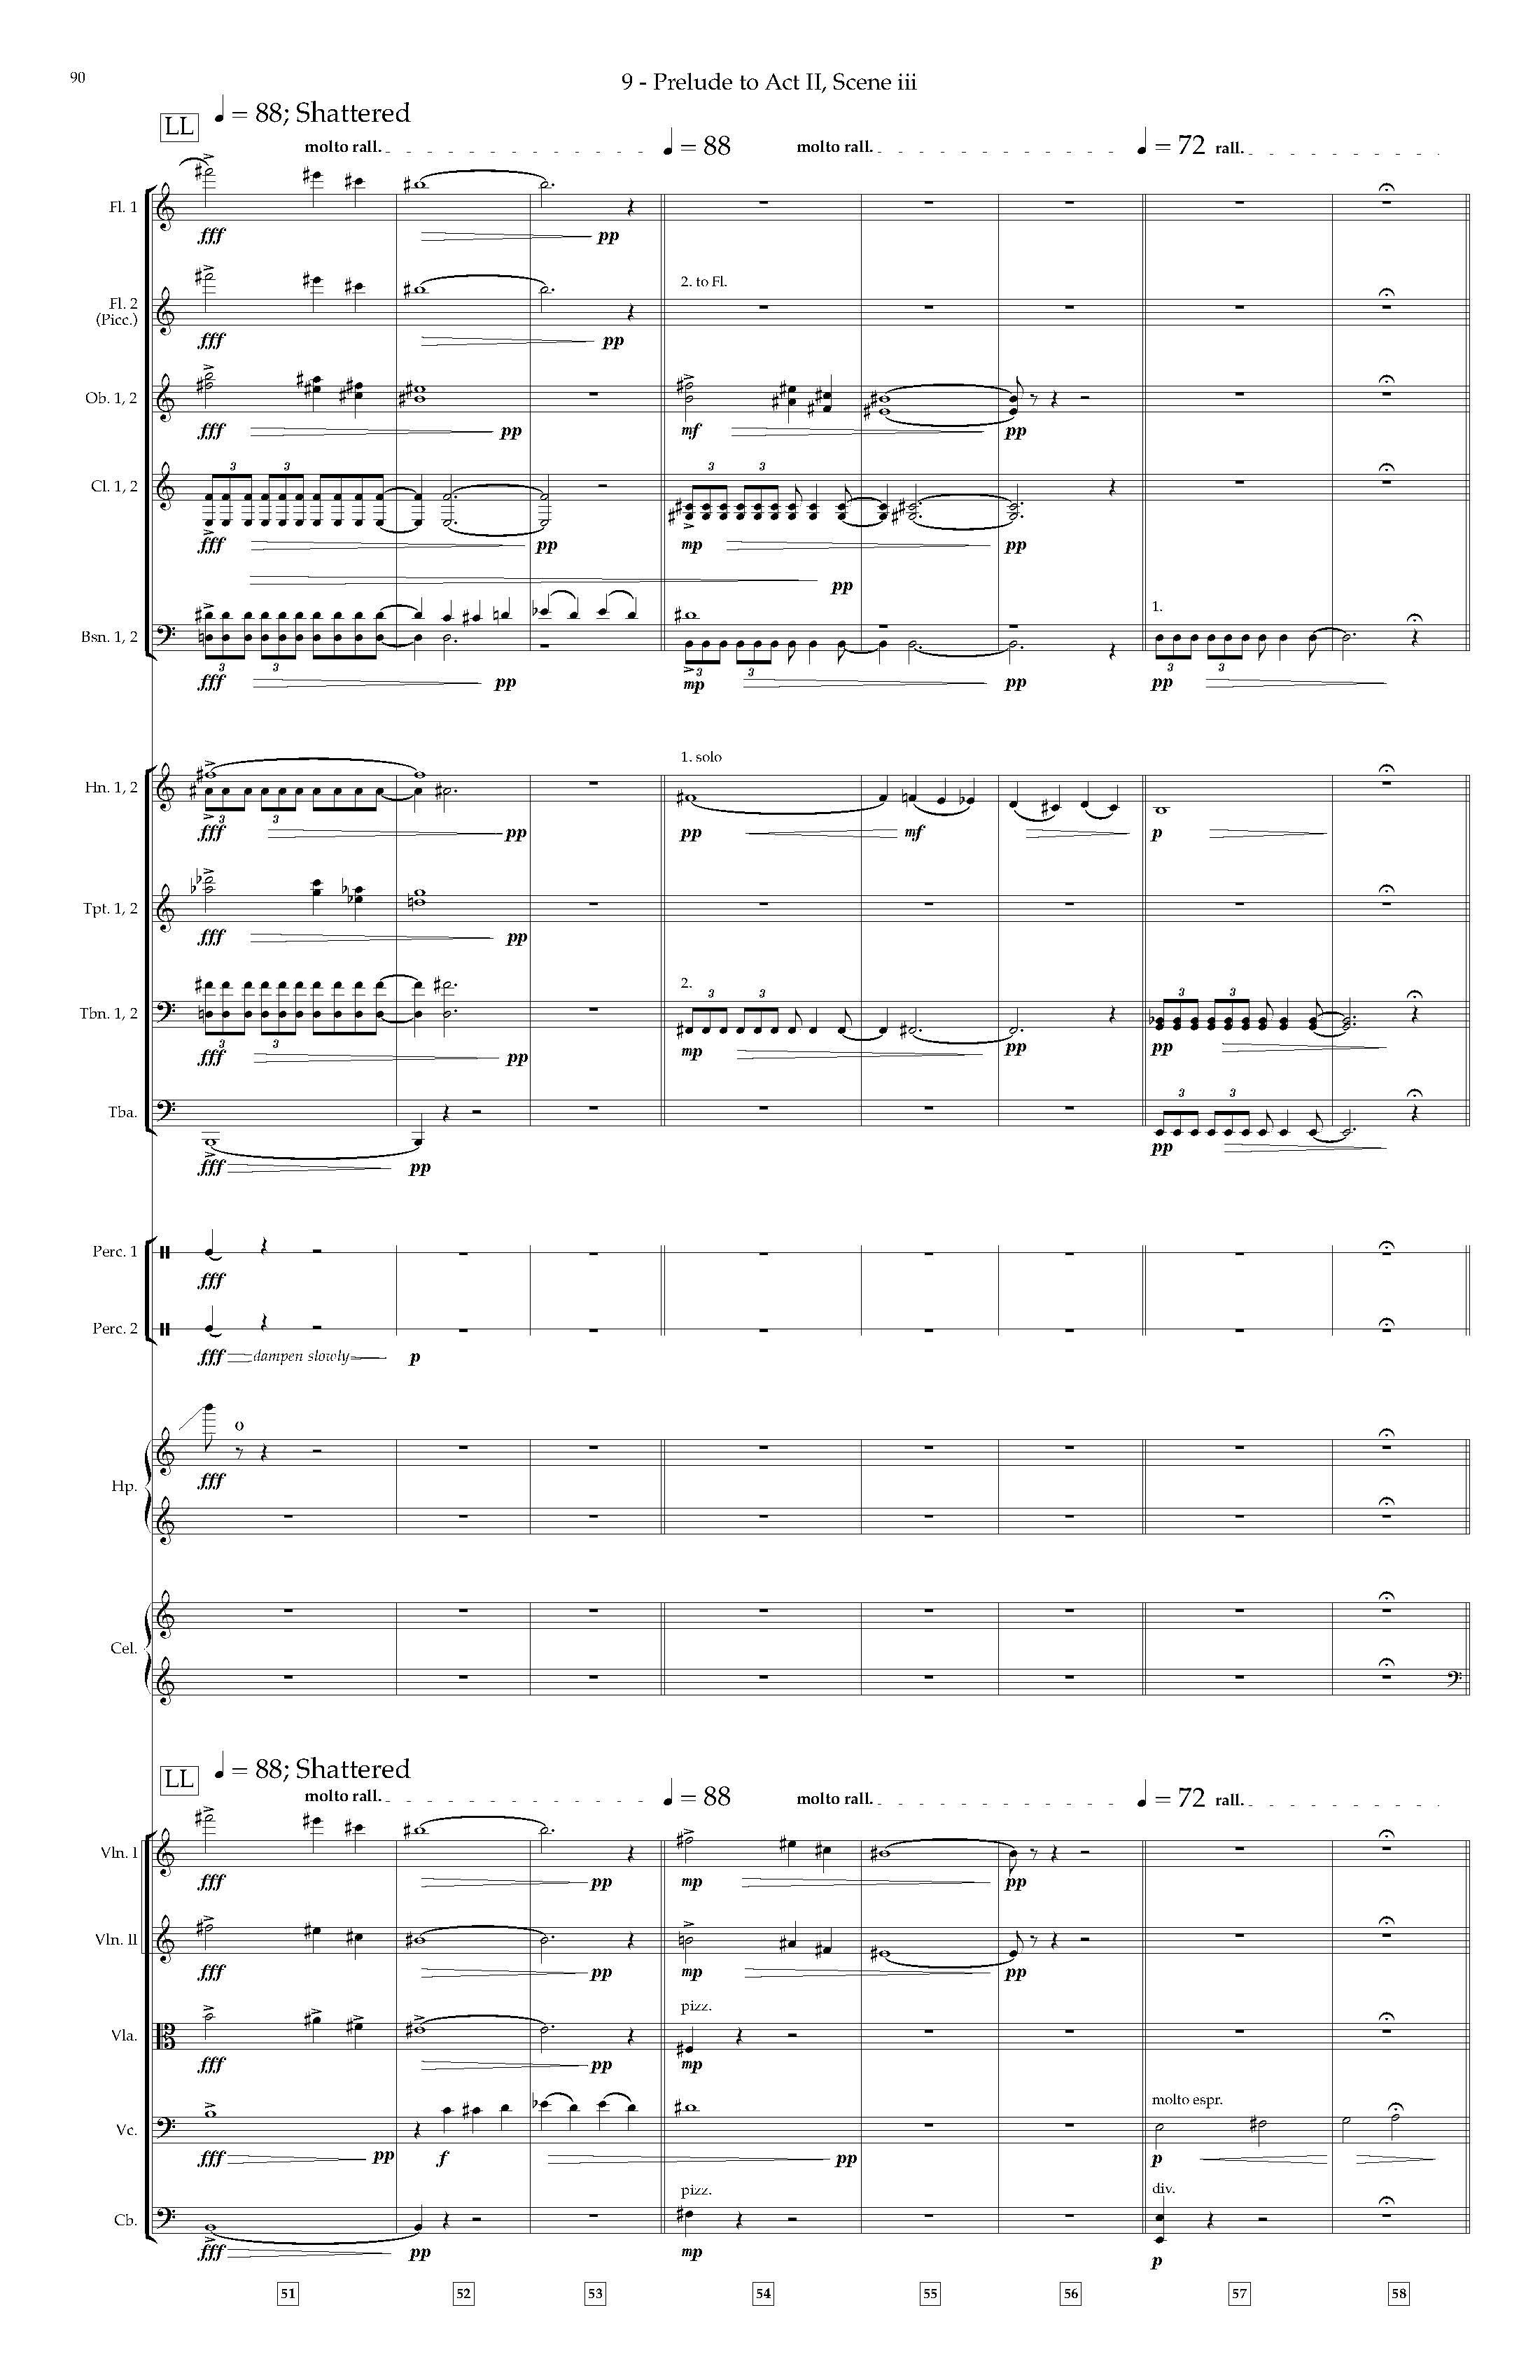 Arias and Interludes from HWGS - Complete Score_Page_96.jpg